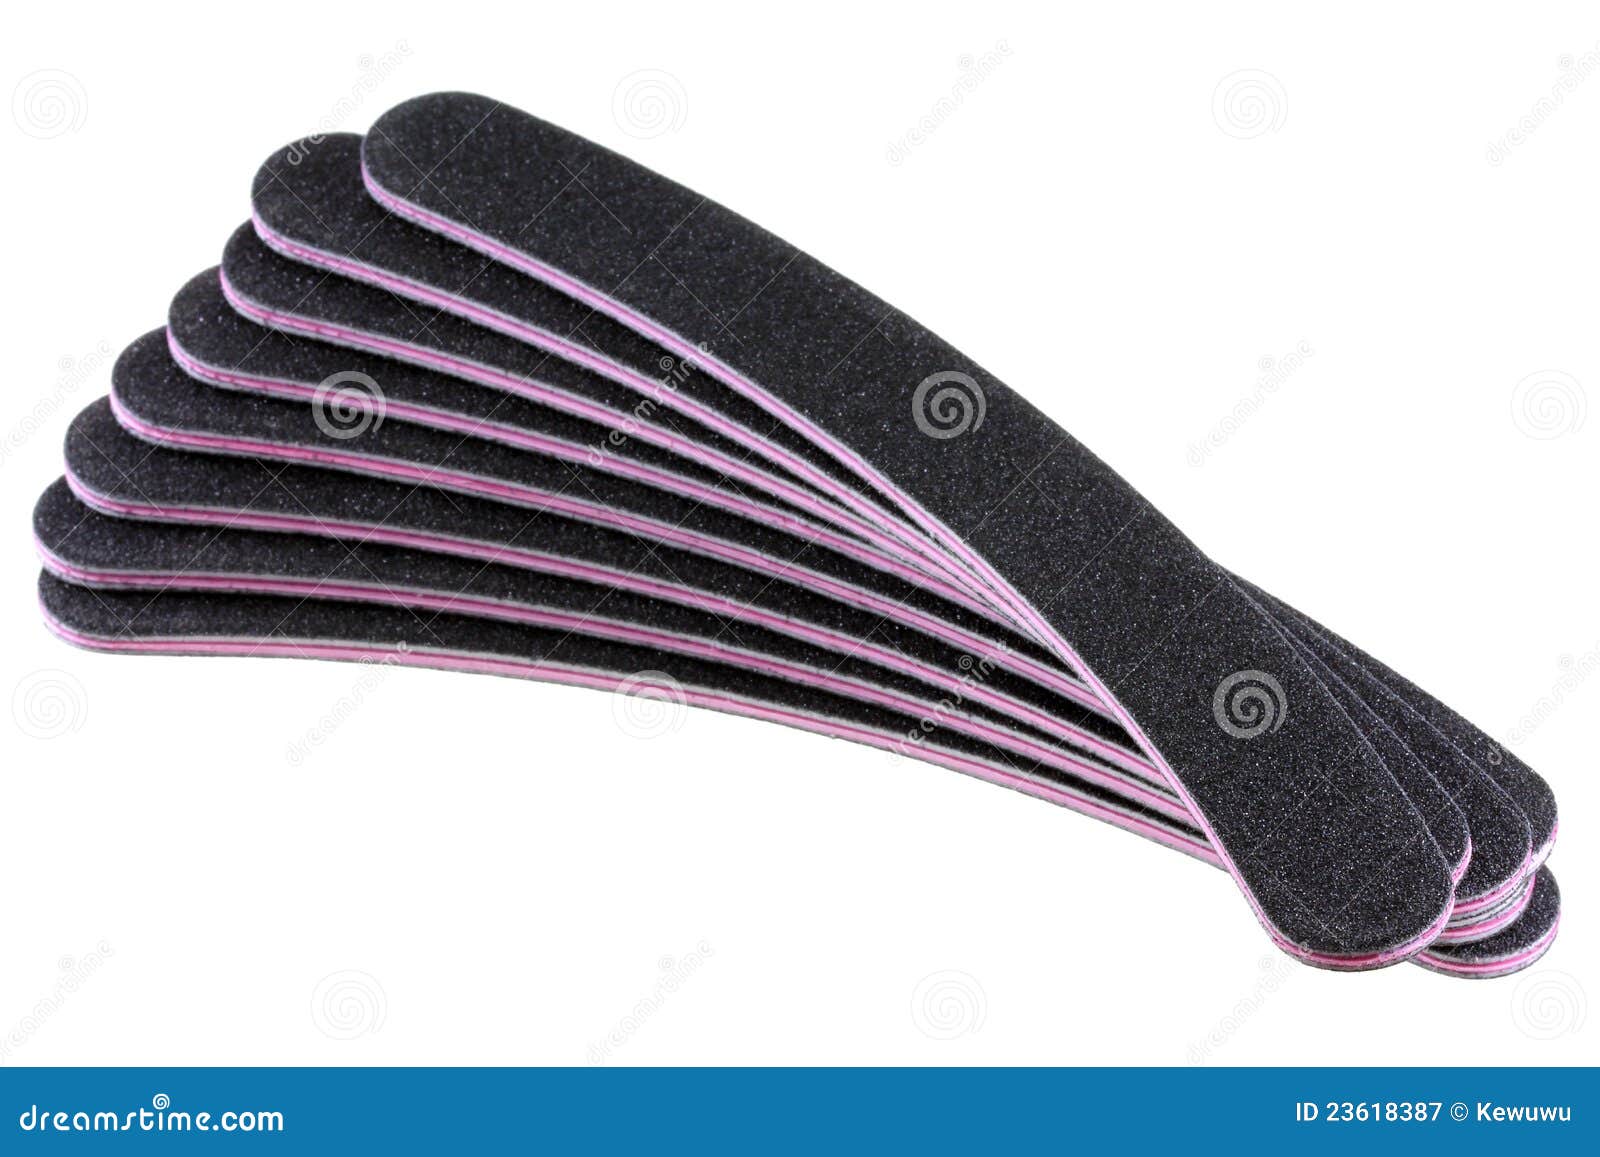 flexible emery board used in manicures and pedicur